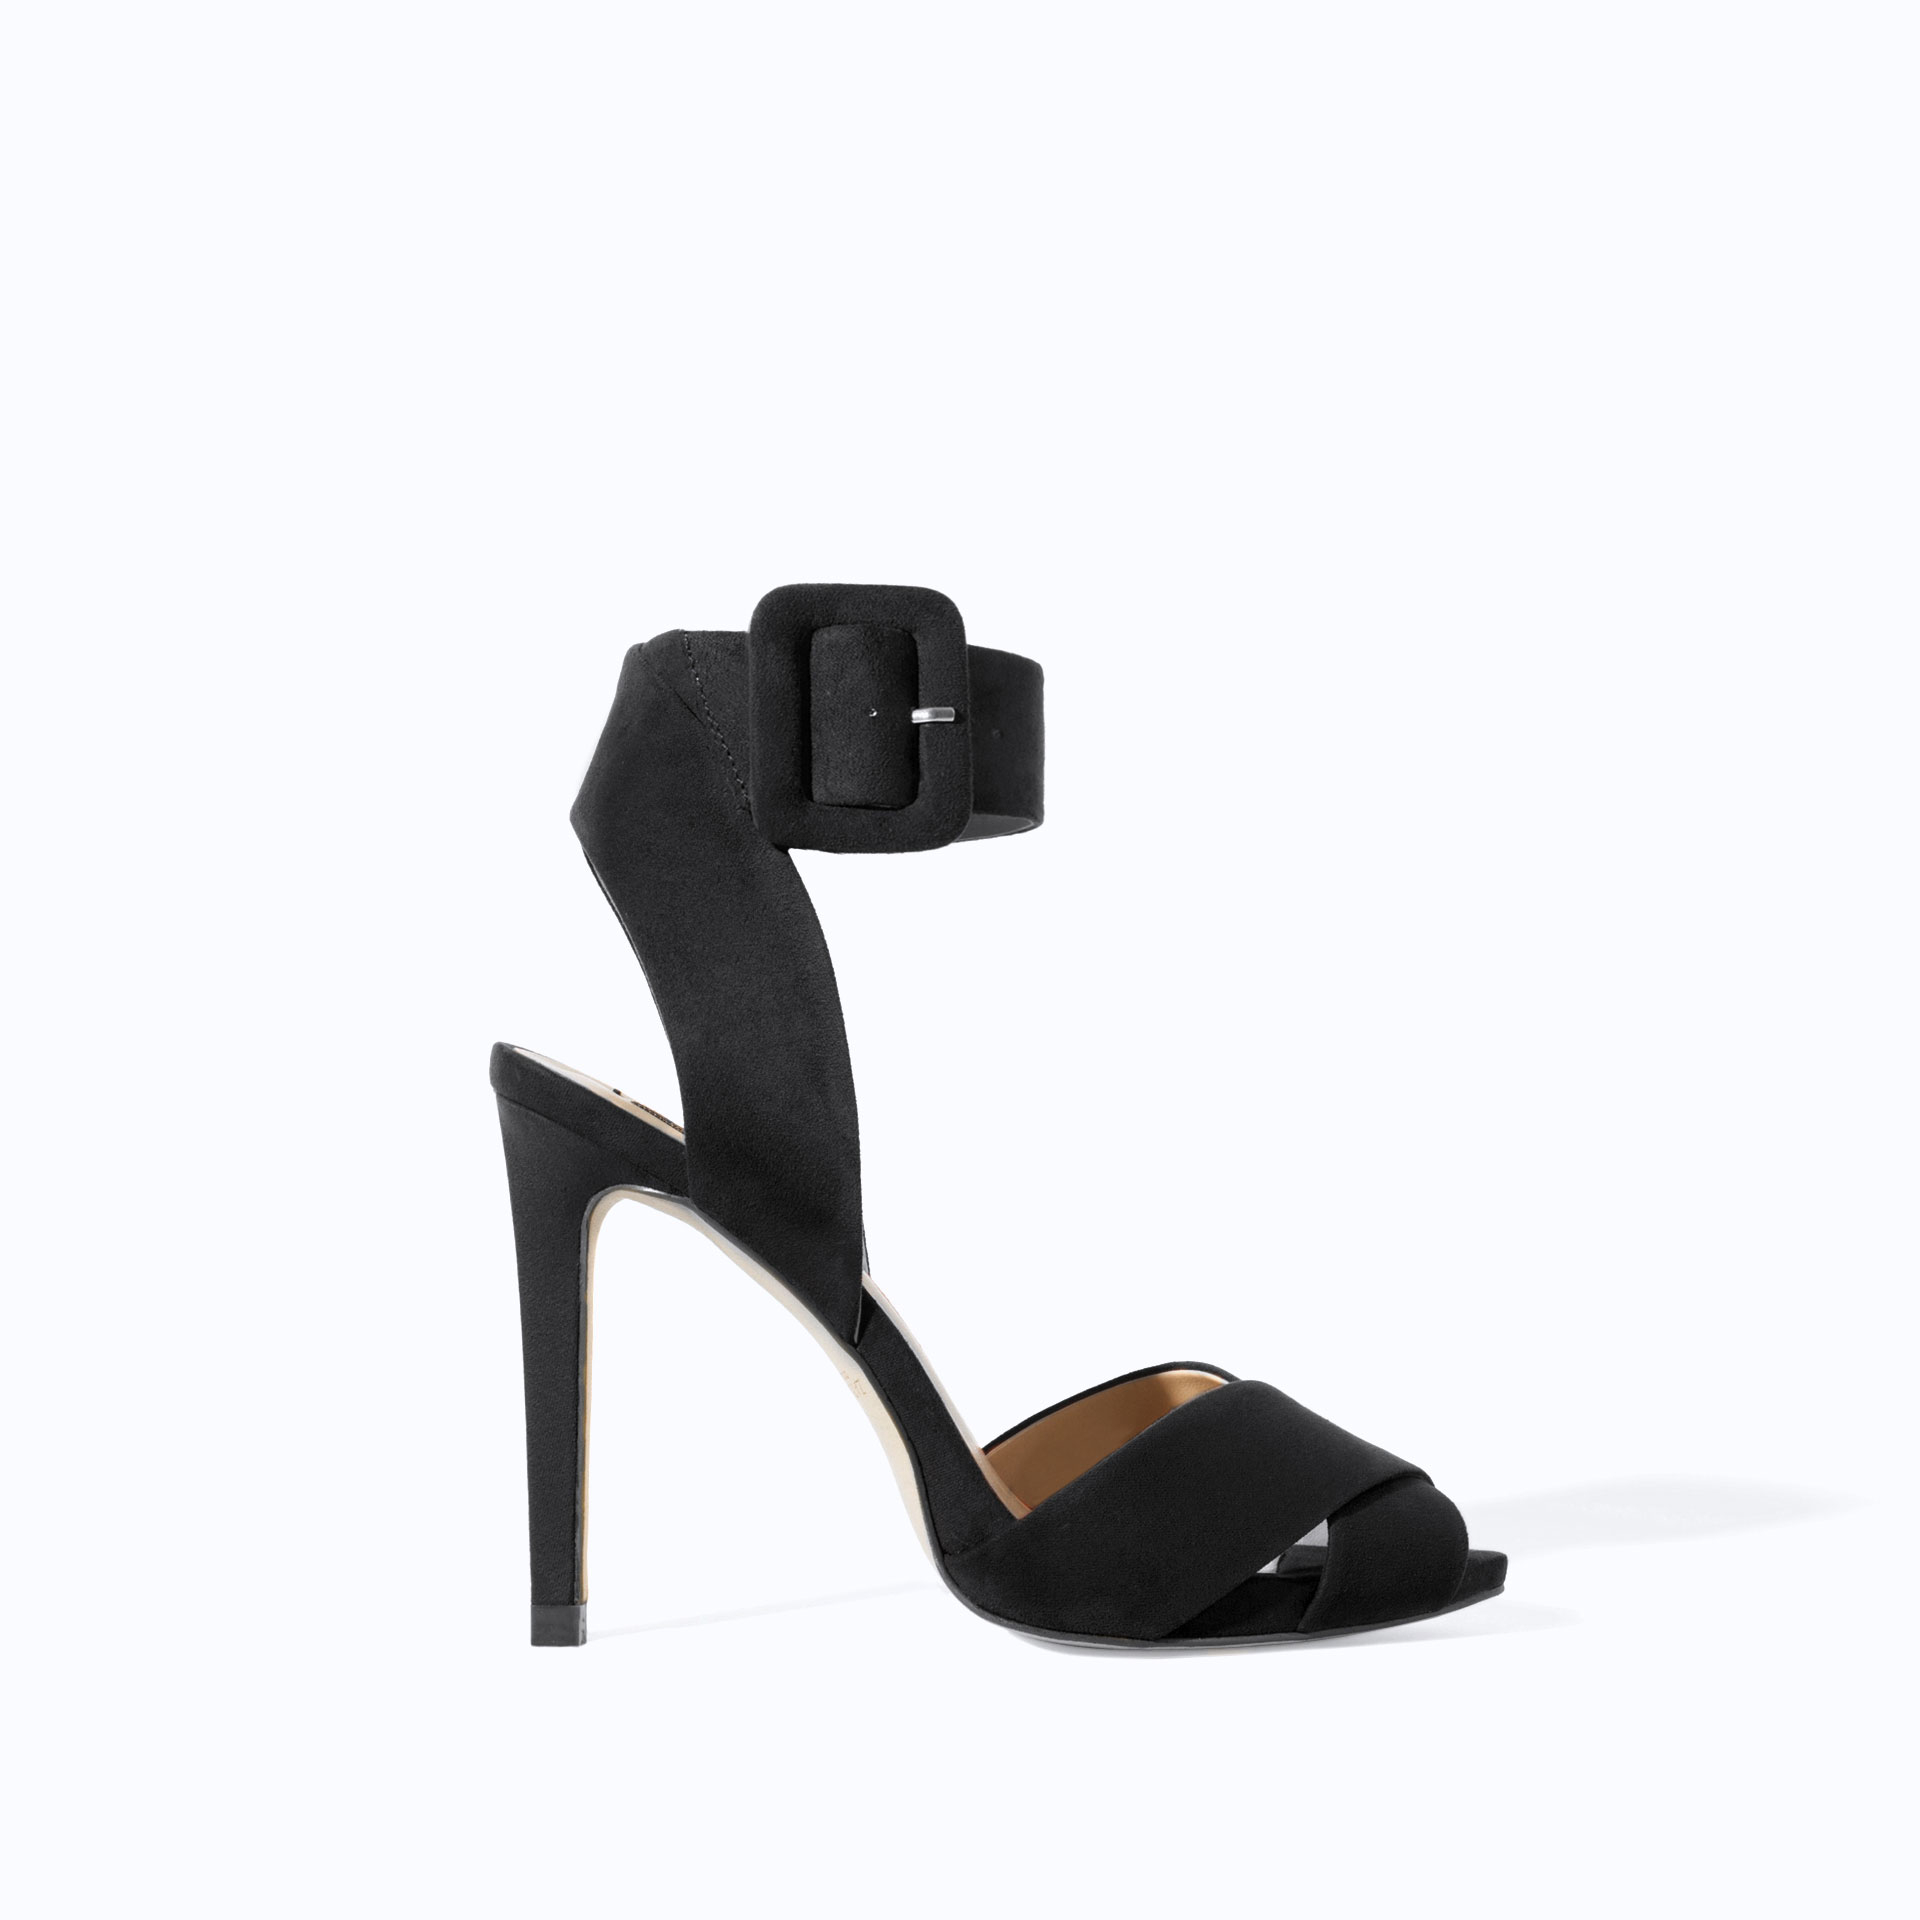 Zara High Heel Sandal with Ankle Strap in Black | Lyst